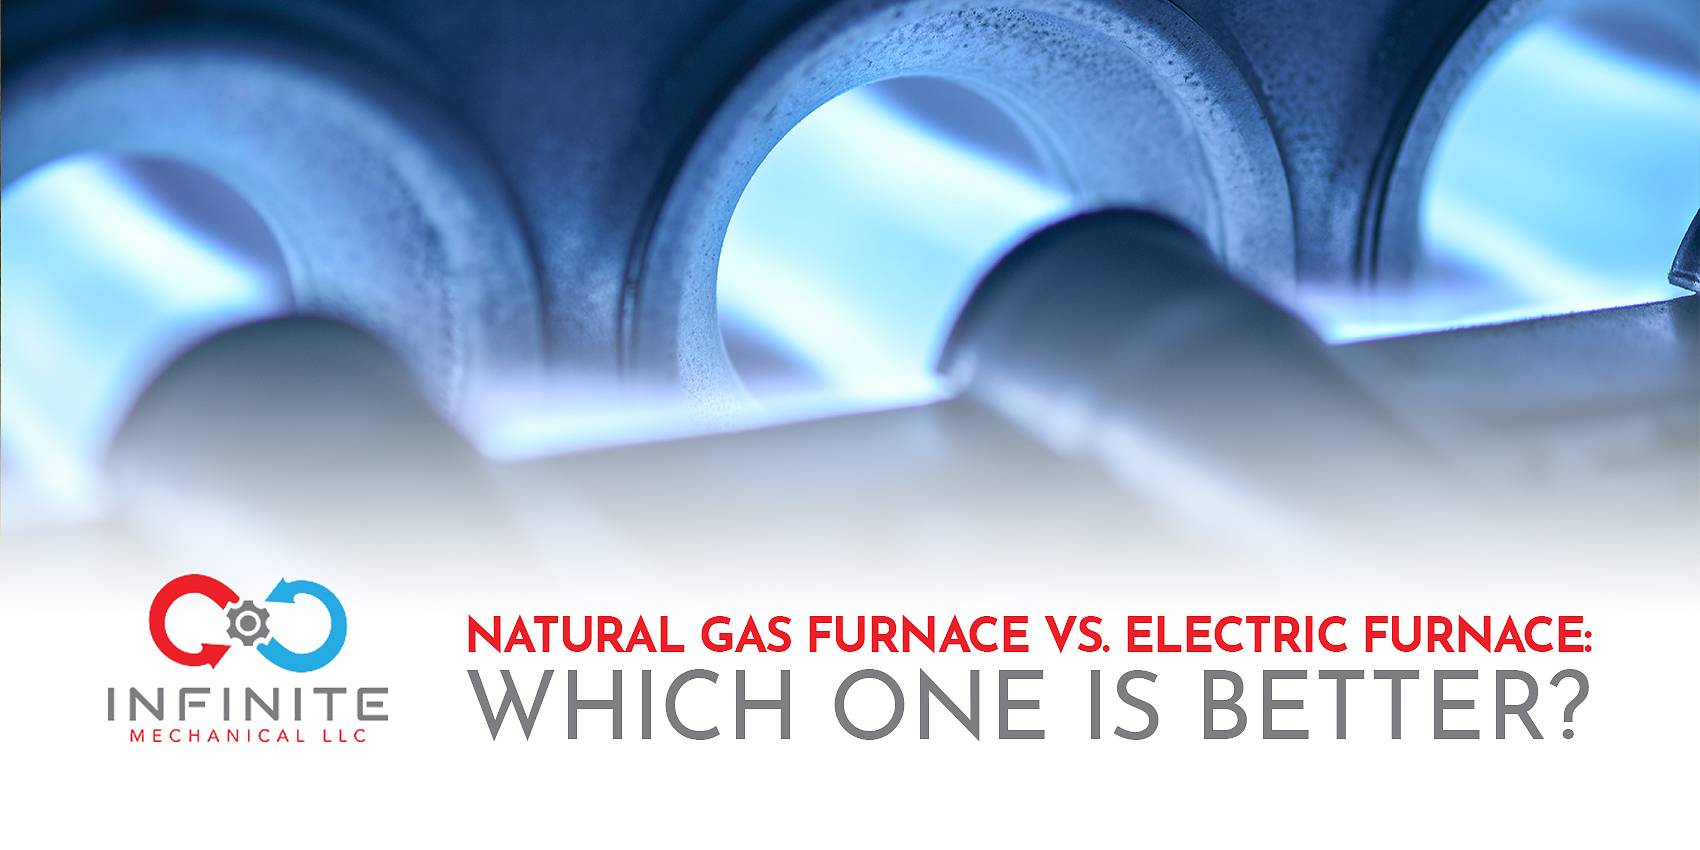 Natural Gas Furnace vs. Electric Furnace: Which One Is Better?